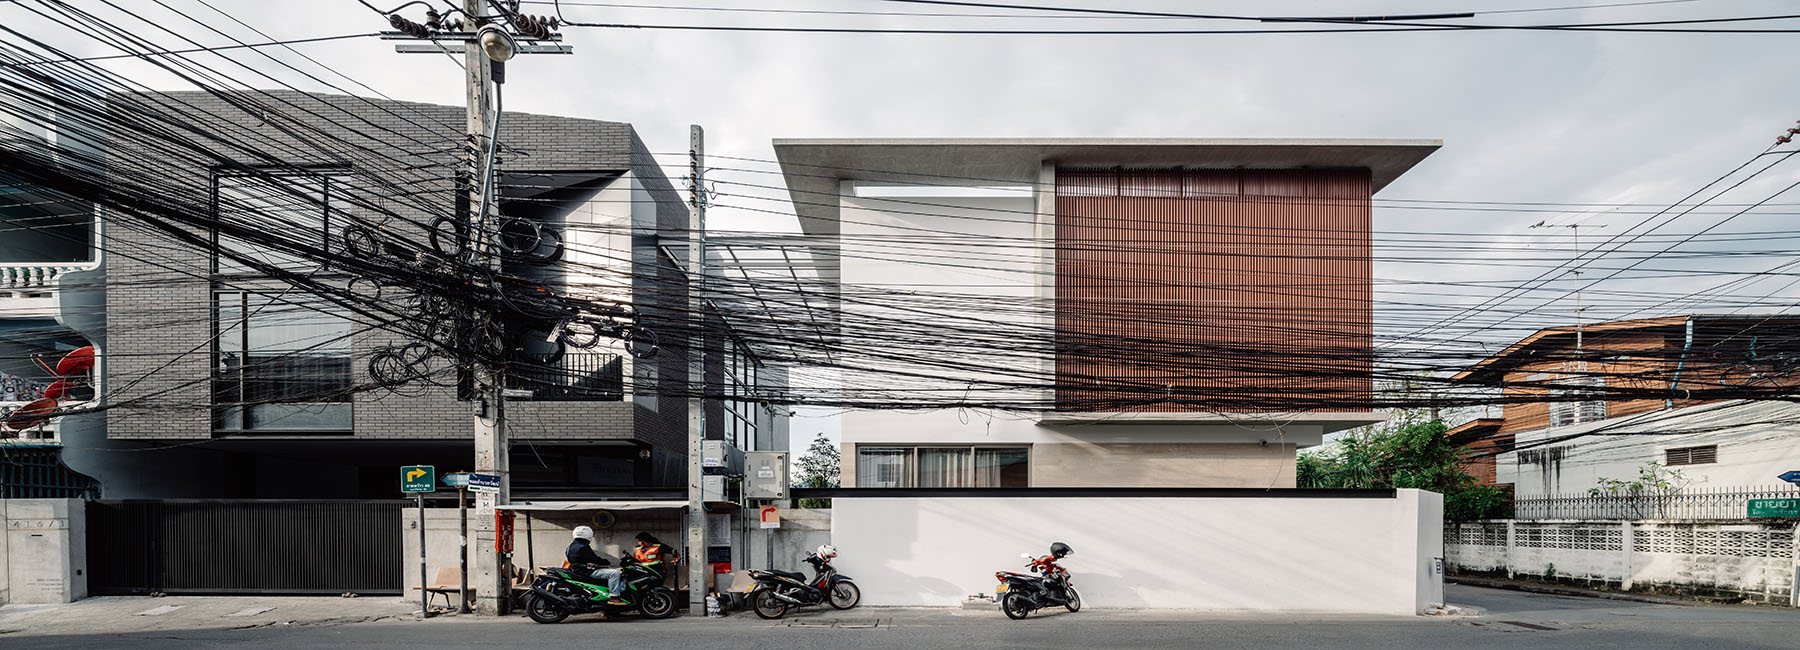 flat12x builds two different houses in one lot for pair of brothers in thailand